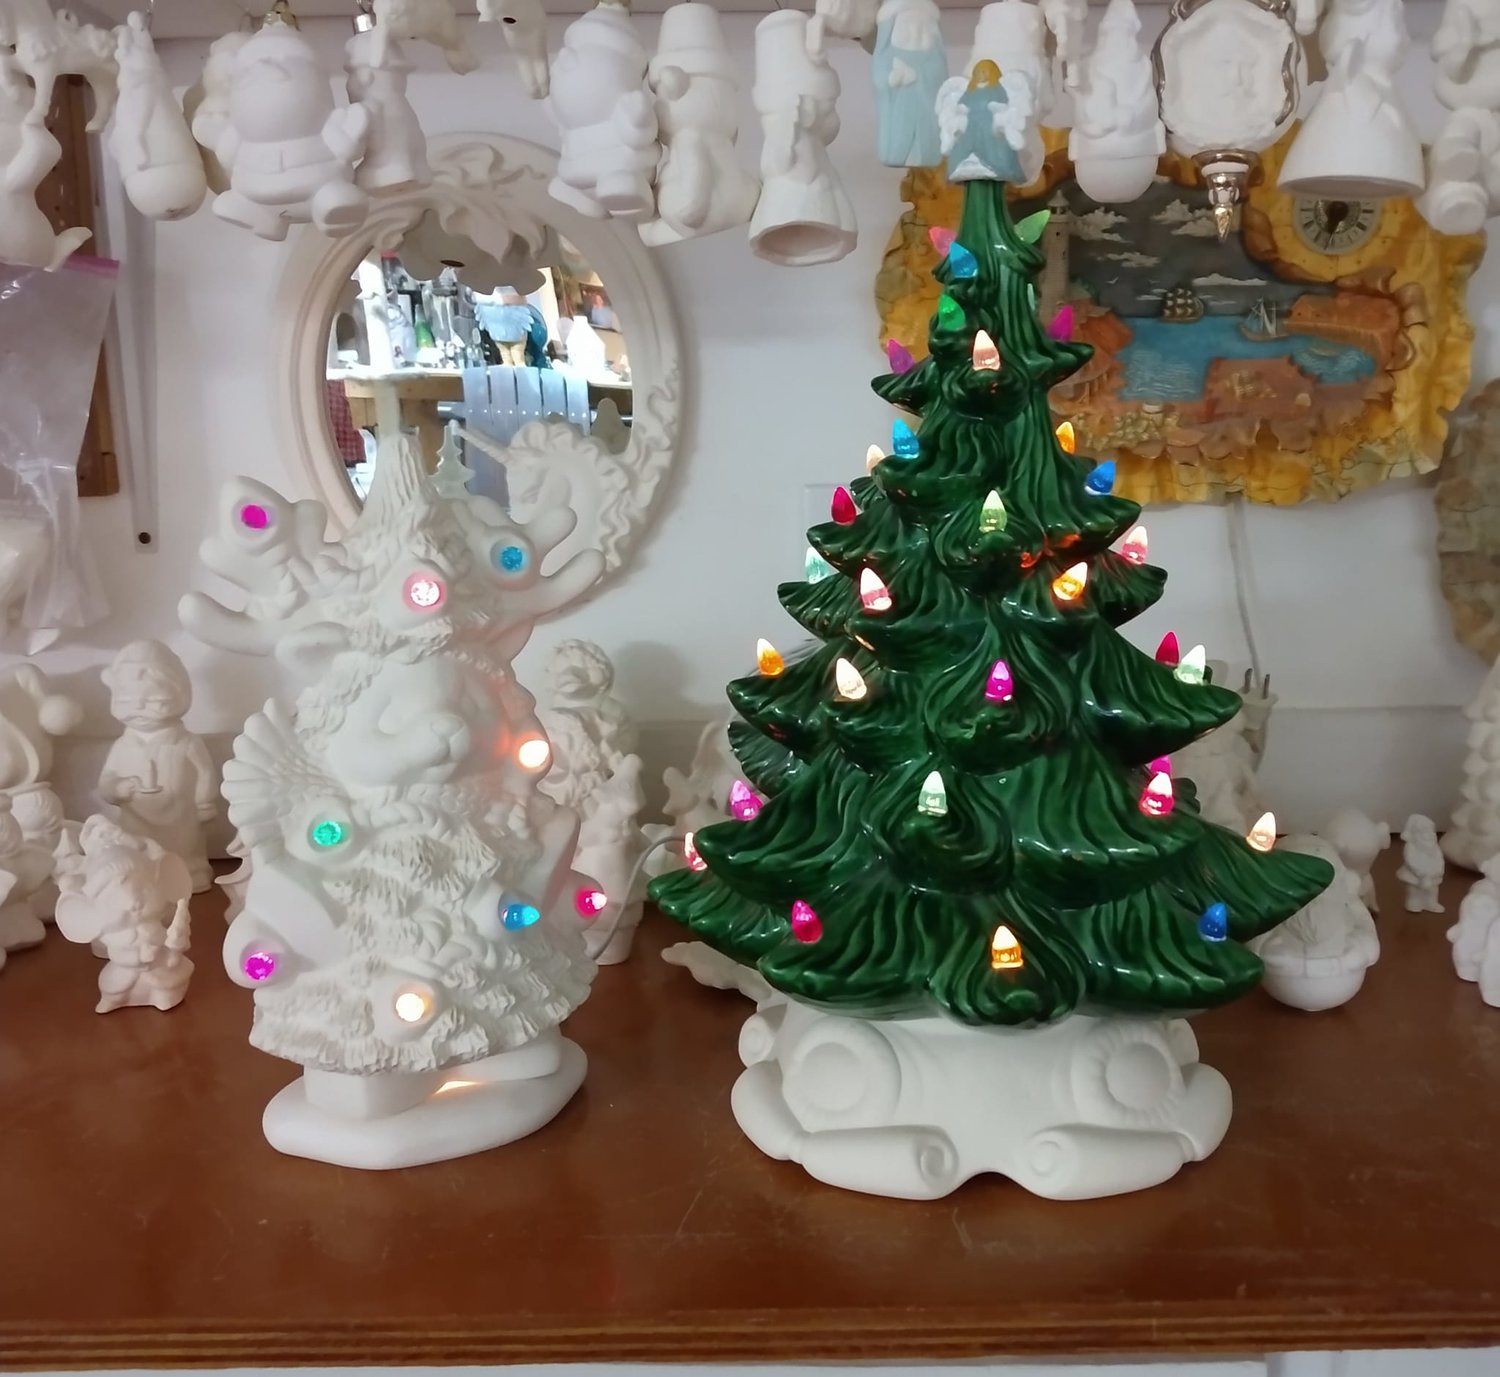 A Christmas tree, and other holiday decorations, are displayed at Out Back Ceramics and Art Studio in Roy, which has been open for 25 years.